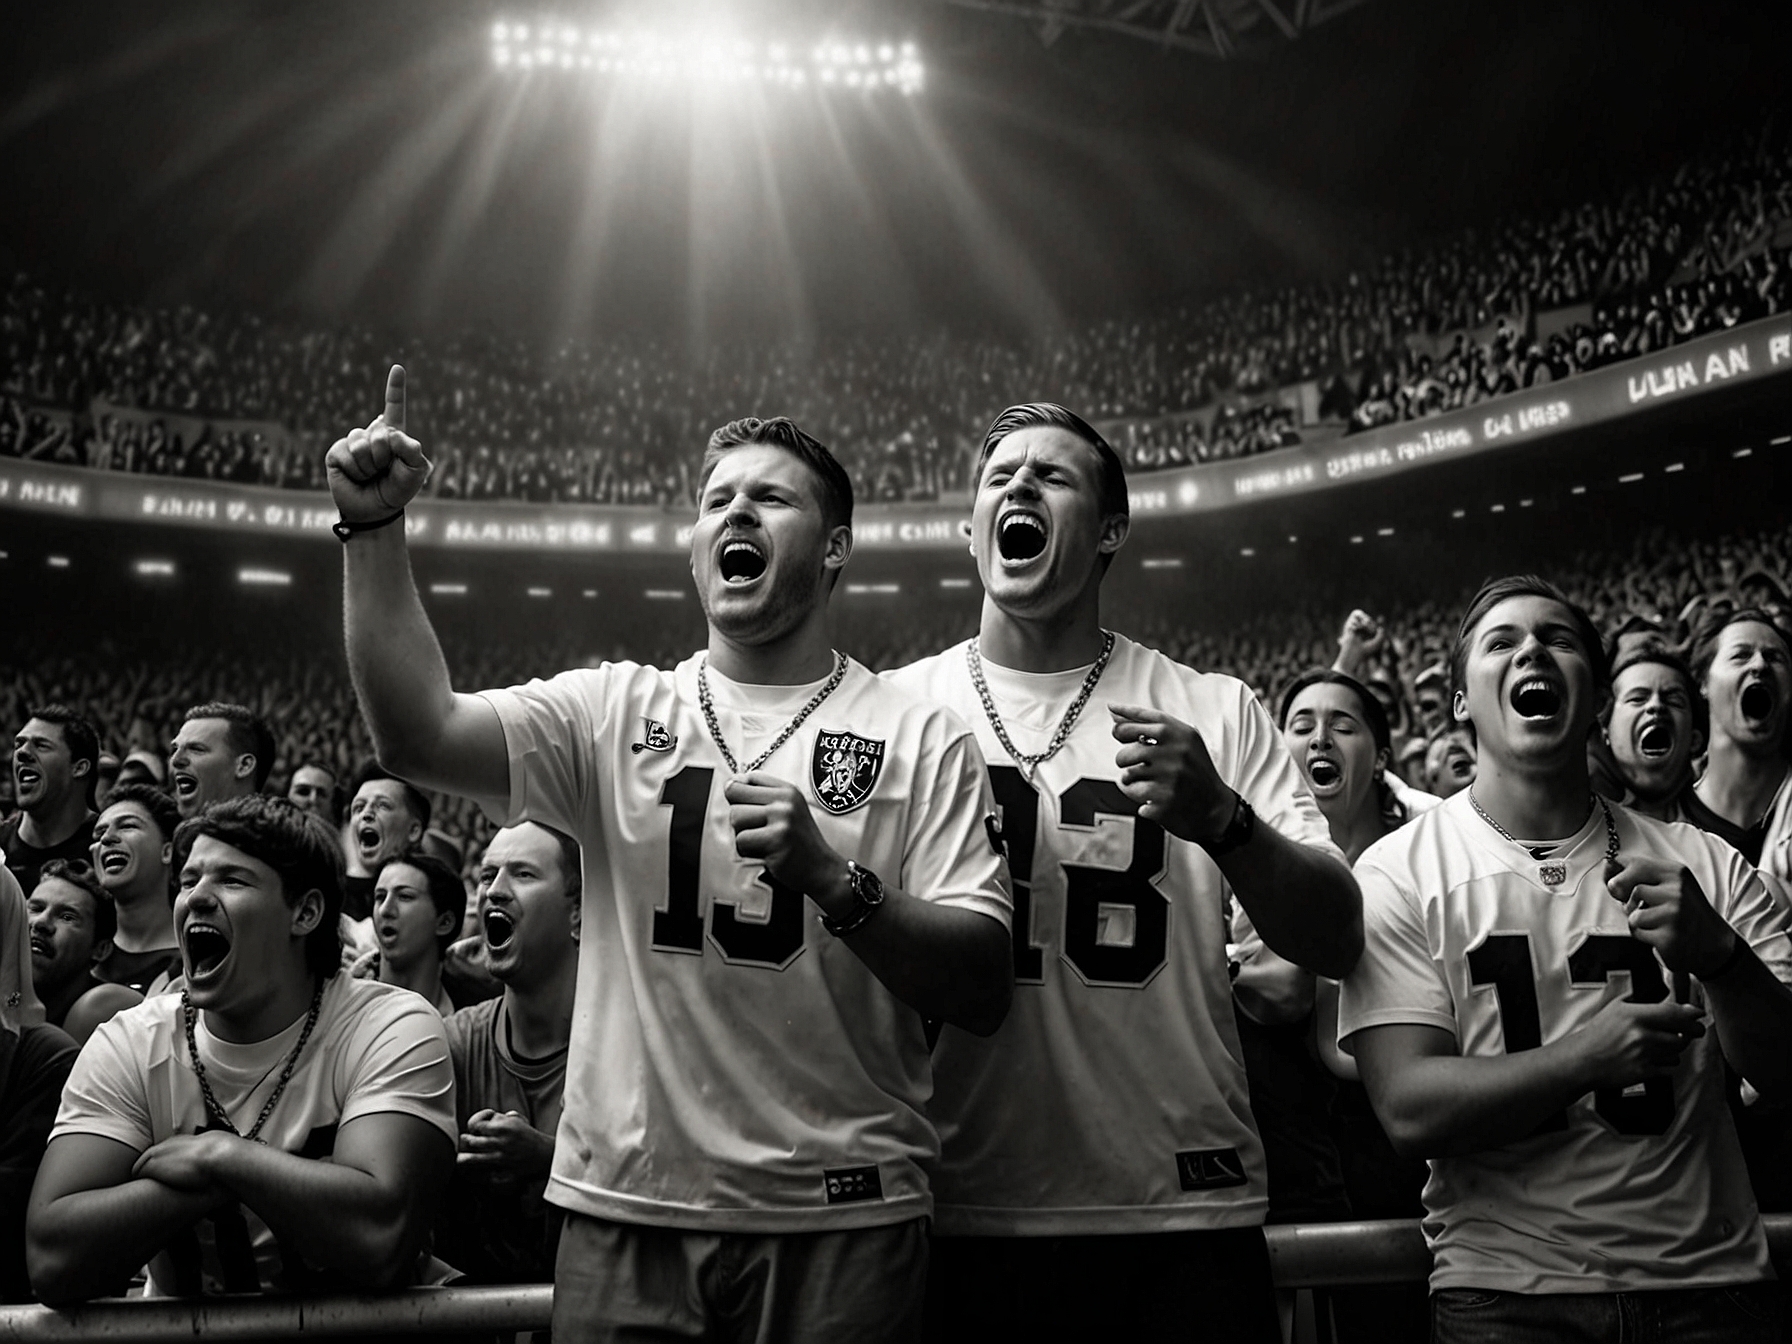 An image illustrating the emotional Raiders fans, displaying their fervent support during a game, symbolizing the passionate atmosphere that surrounds the team irrespective of their performance on the field.